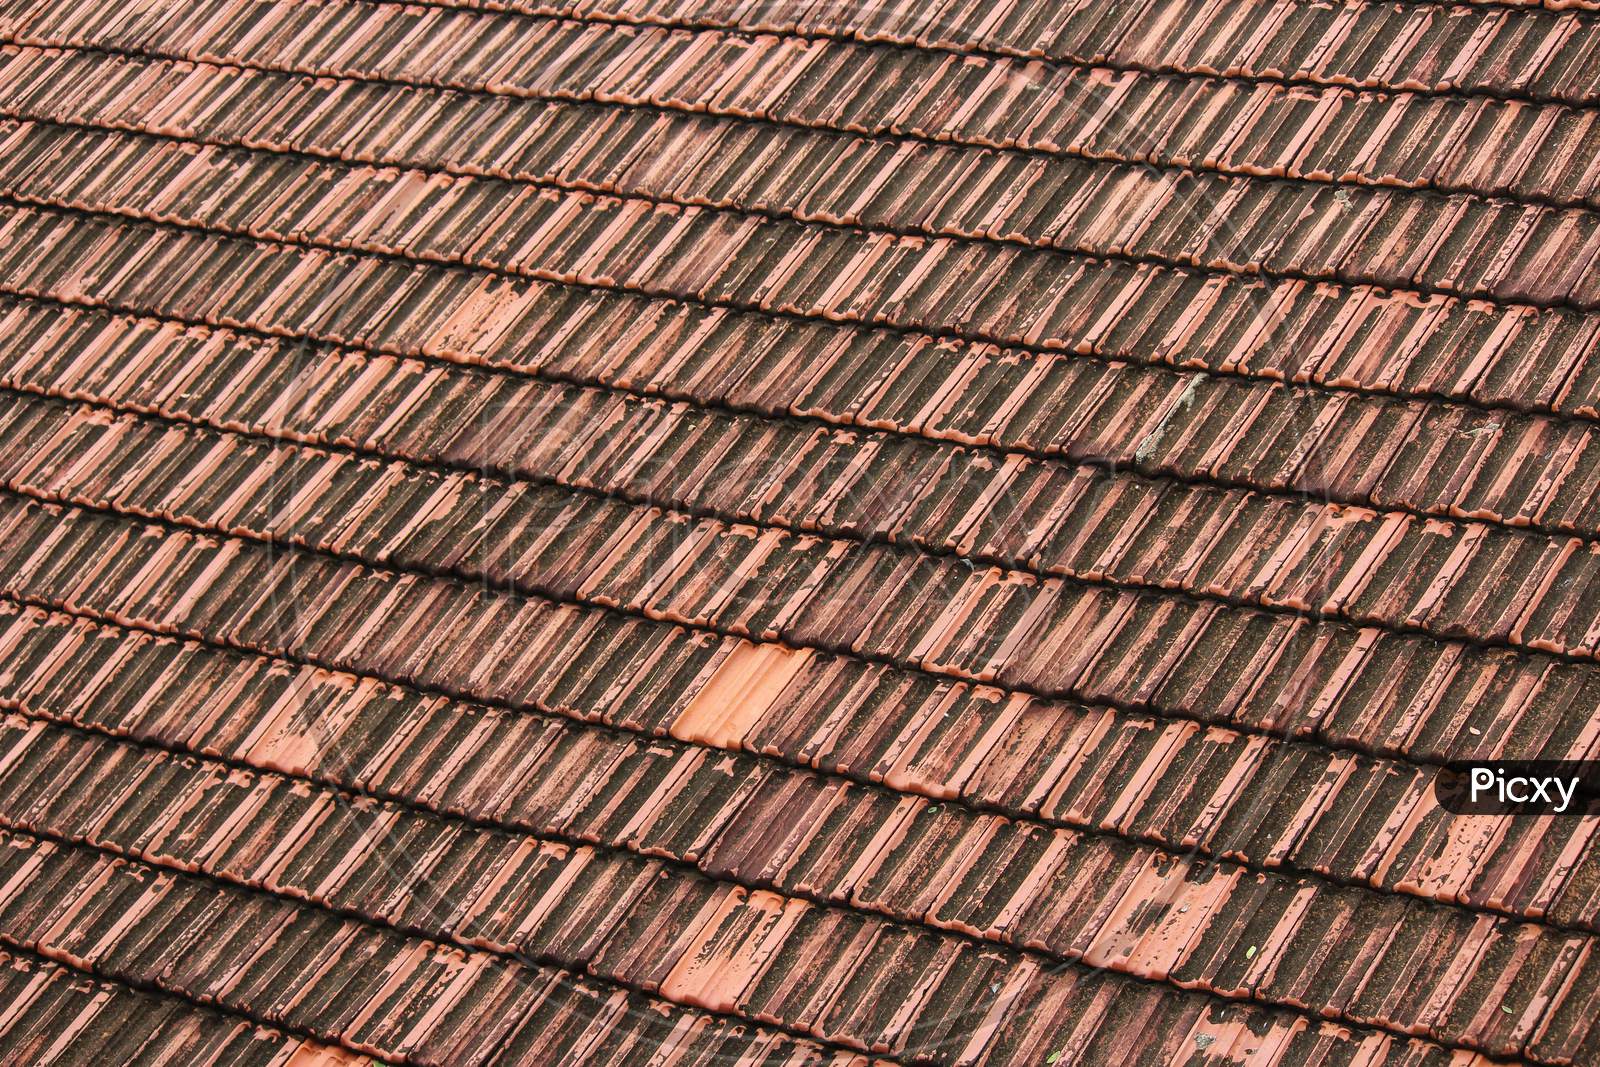 Texture Of A Terracotta Tile Roof, Terracotta Tile Roof